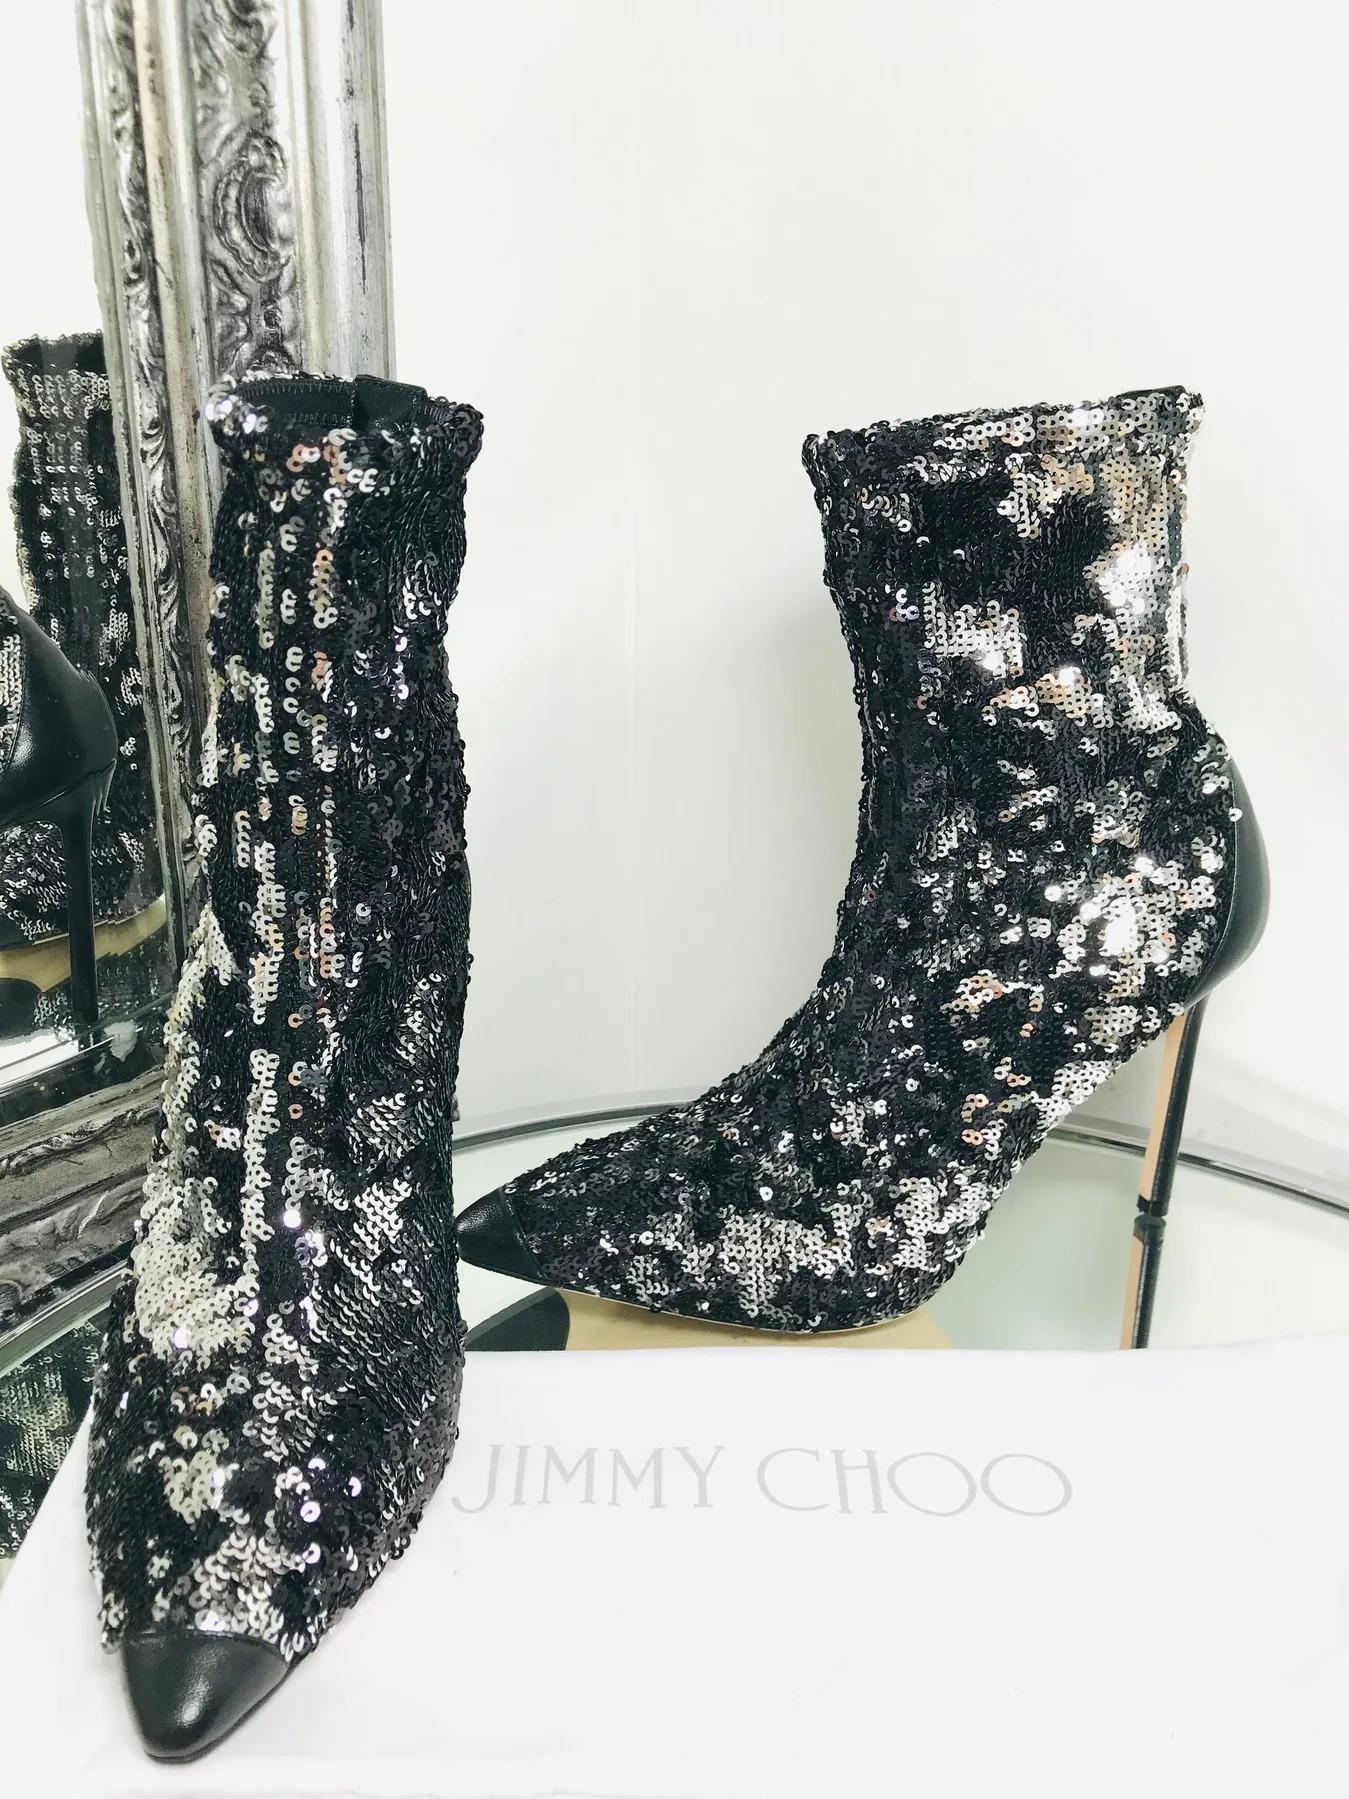 Jimmy Choo Ricky 100 Black Leather-Trimmed Sock Boots

Designed with double-faced sequin embellishment. Featuring pointed toe, leather sole and 10.5cm heel.

Additional information:
Size – 39
Condition – Very Good 
Comes with- Dust Bag